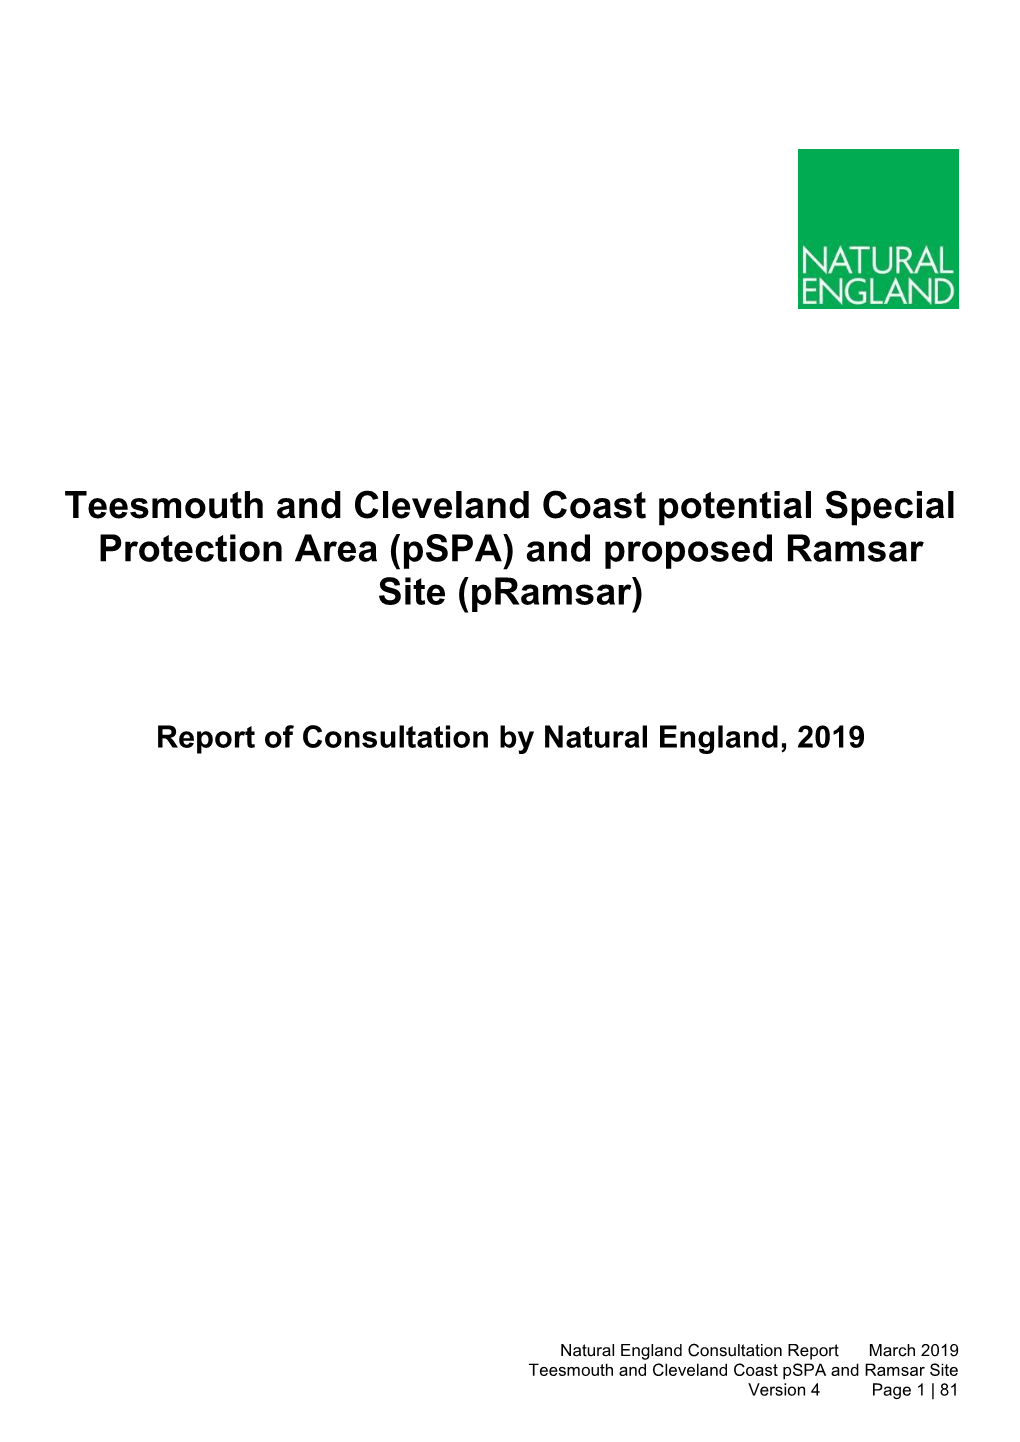 Teesmouth and Cleveland Coast Potential Special Protection Area (Pspa) and Proposed Ramsar Site (Pramsar)